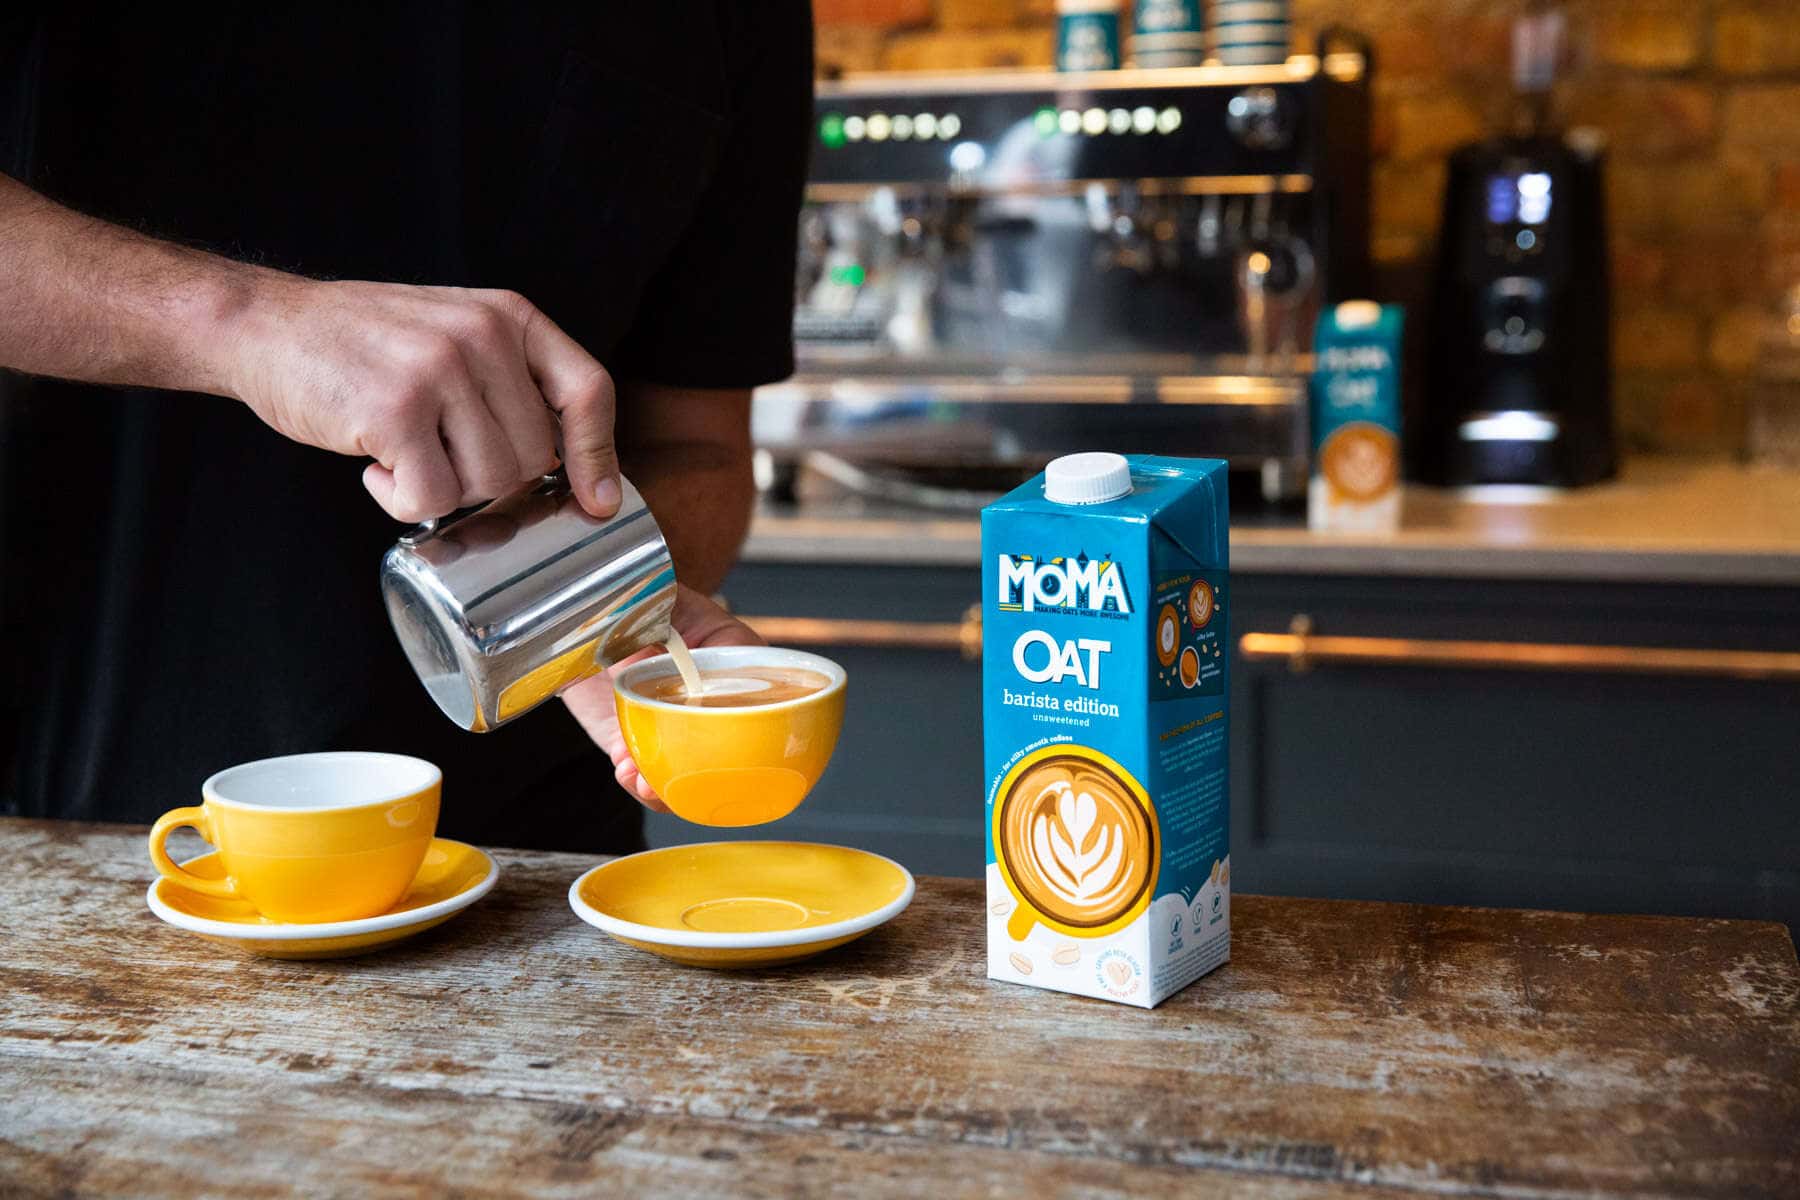 Moma barista oat milk being poured in front of a coffee machine in a cafe